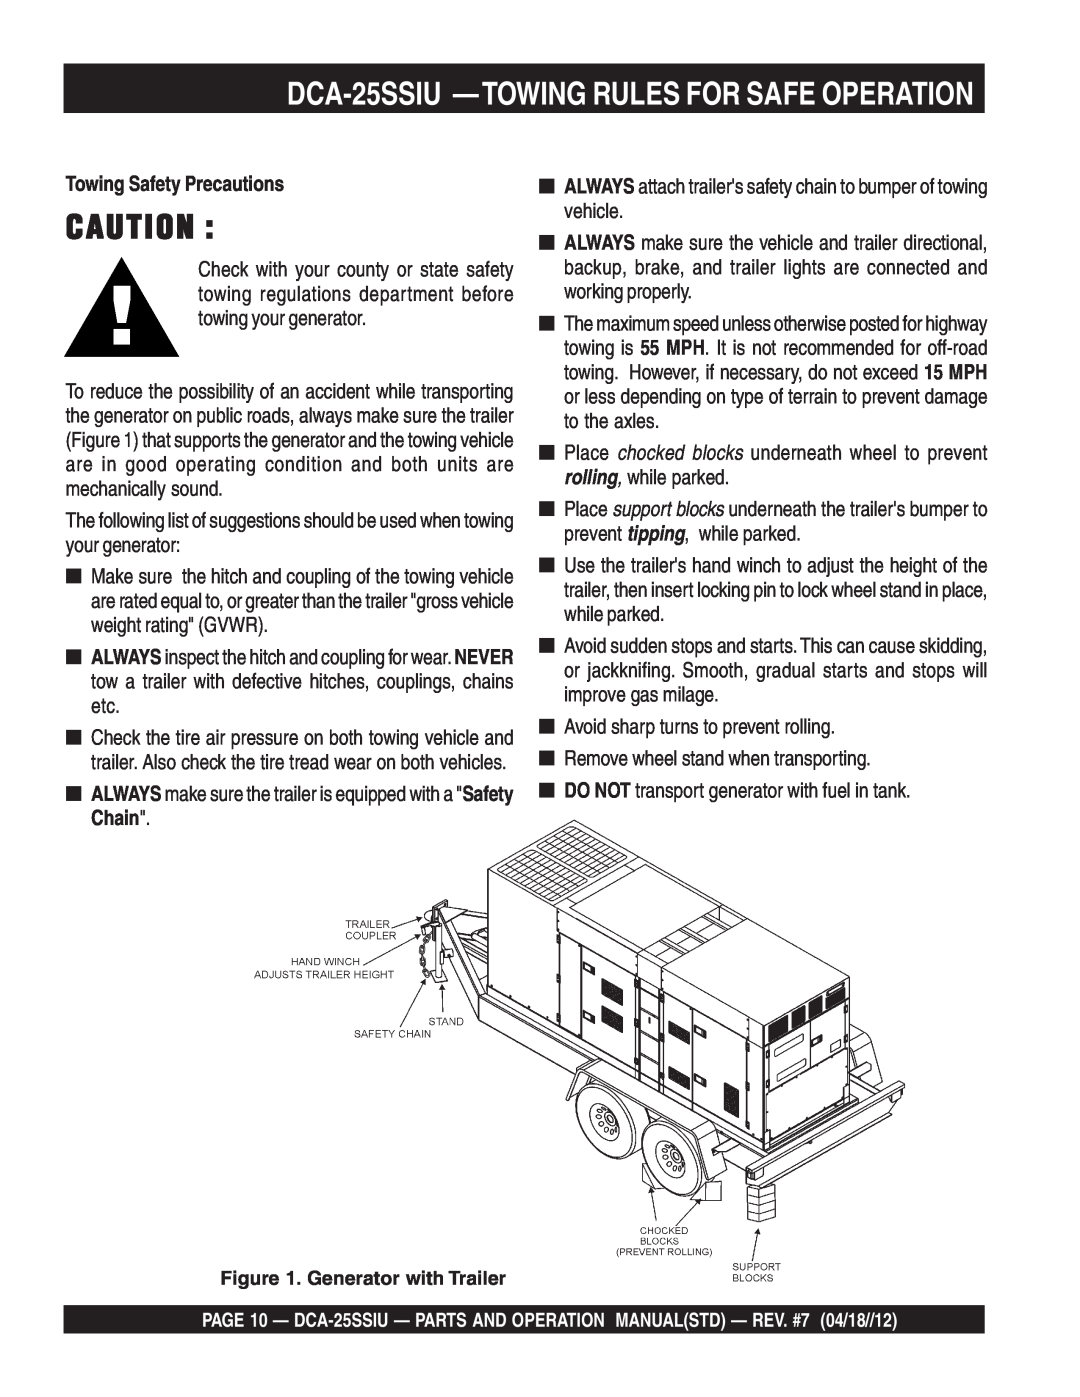 Multiquip DCA25SSIU manual DCA-25SSIU -TOWINGRULES FOR SAFE OPERATION, Towing Safety Precautions 